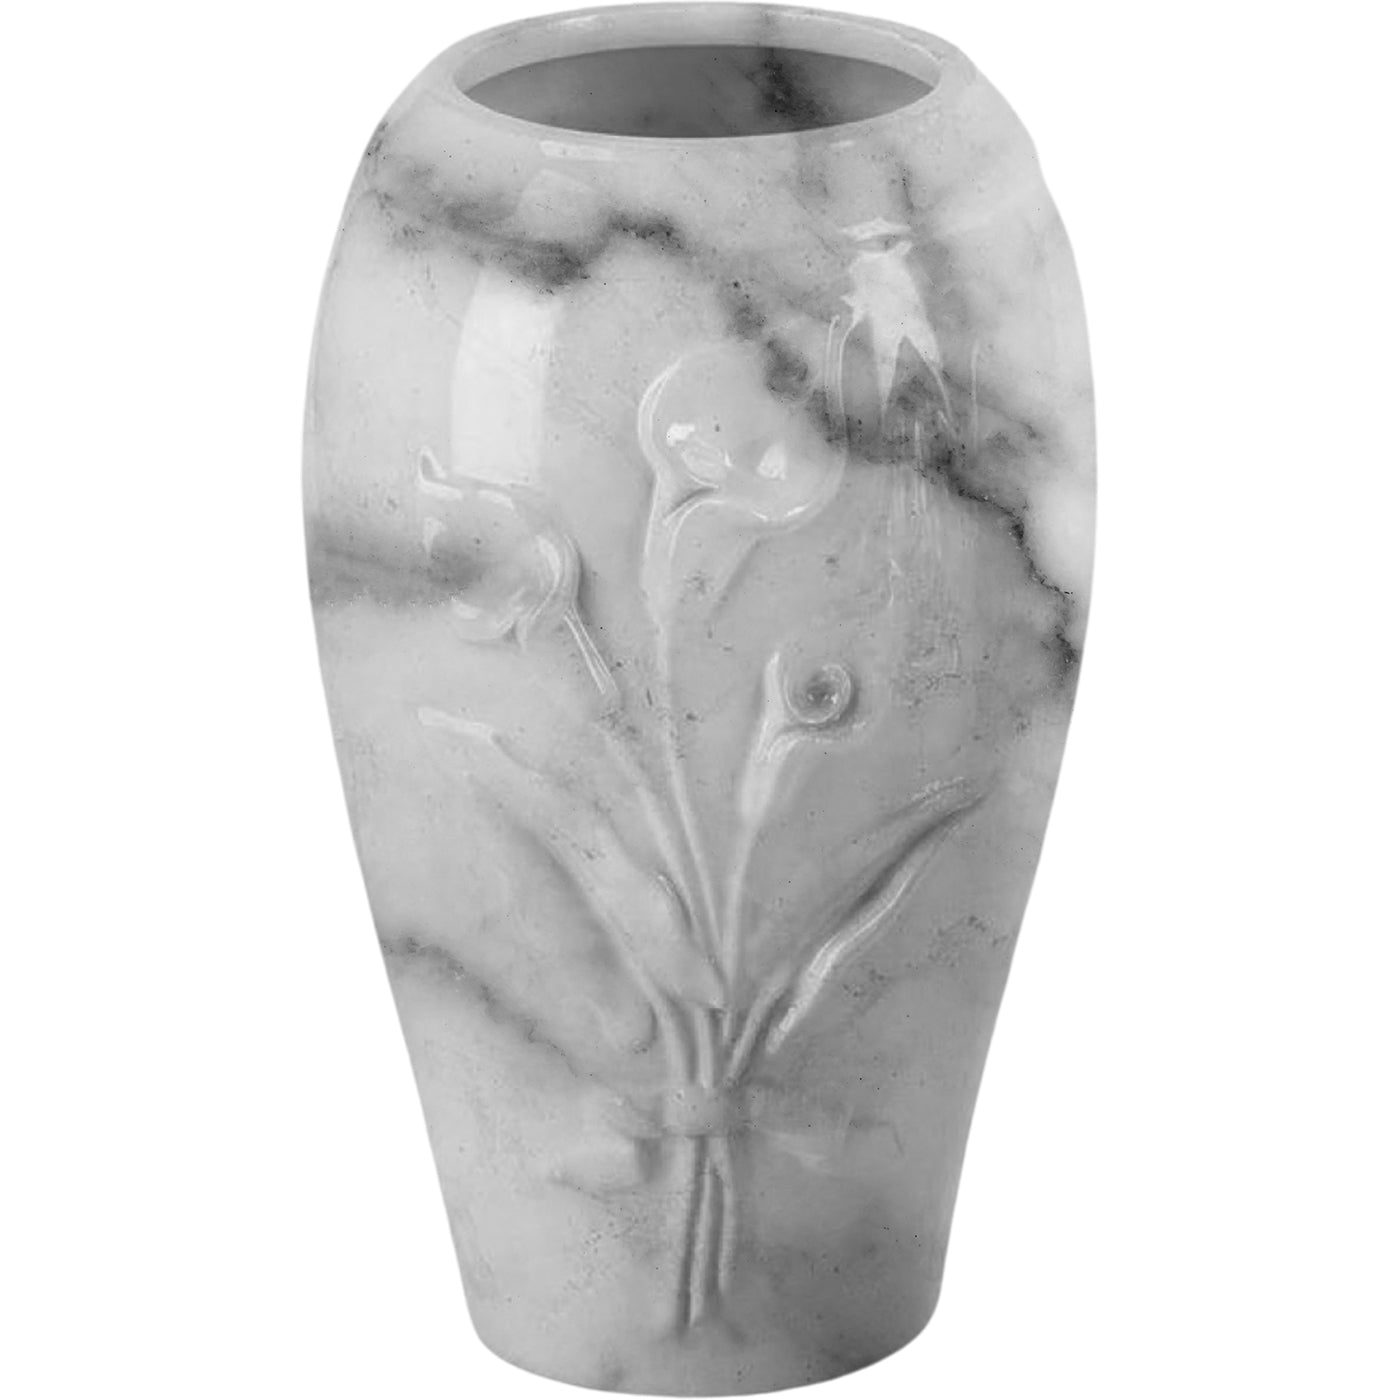 Grave vase Calla carrara 21x13cm - 8.3x5.1in In white porcelain with carrara decoration, ground attached CAL162P/CARR